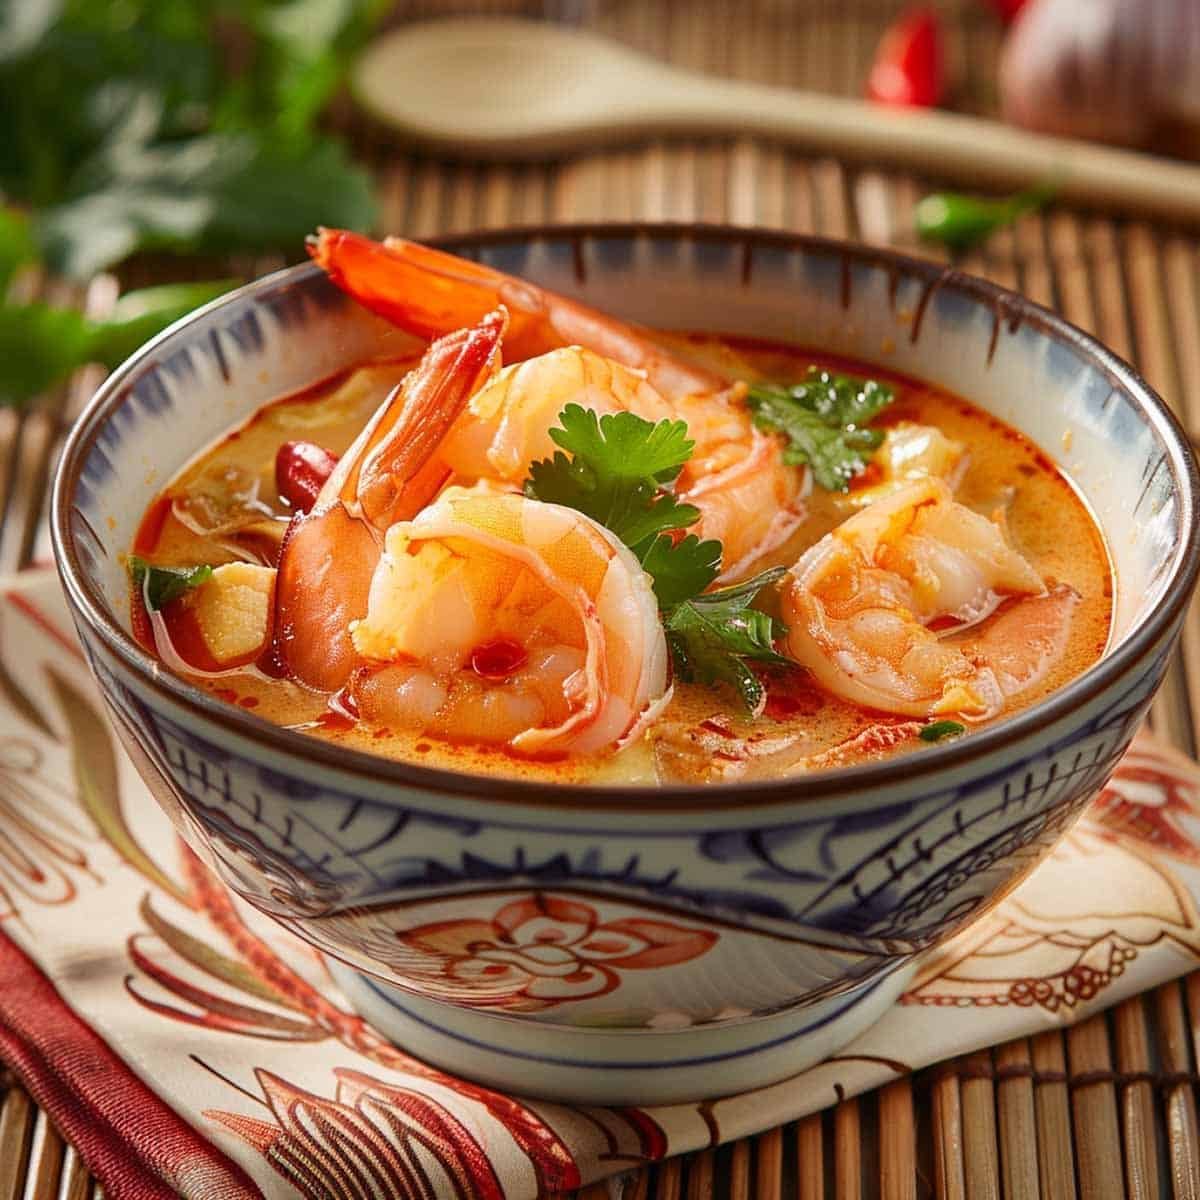 Bowl of spicy Tom Yum Goong soup featuring shrimp, mushrooms, cherry tomatoes, and fresh herbs."